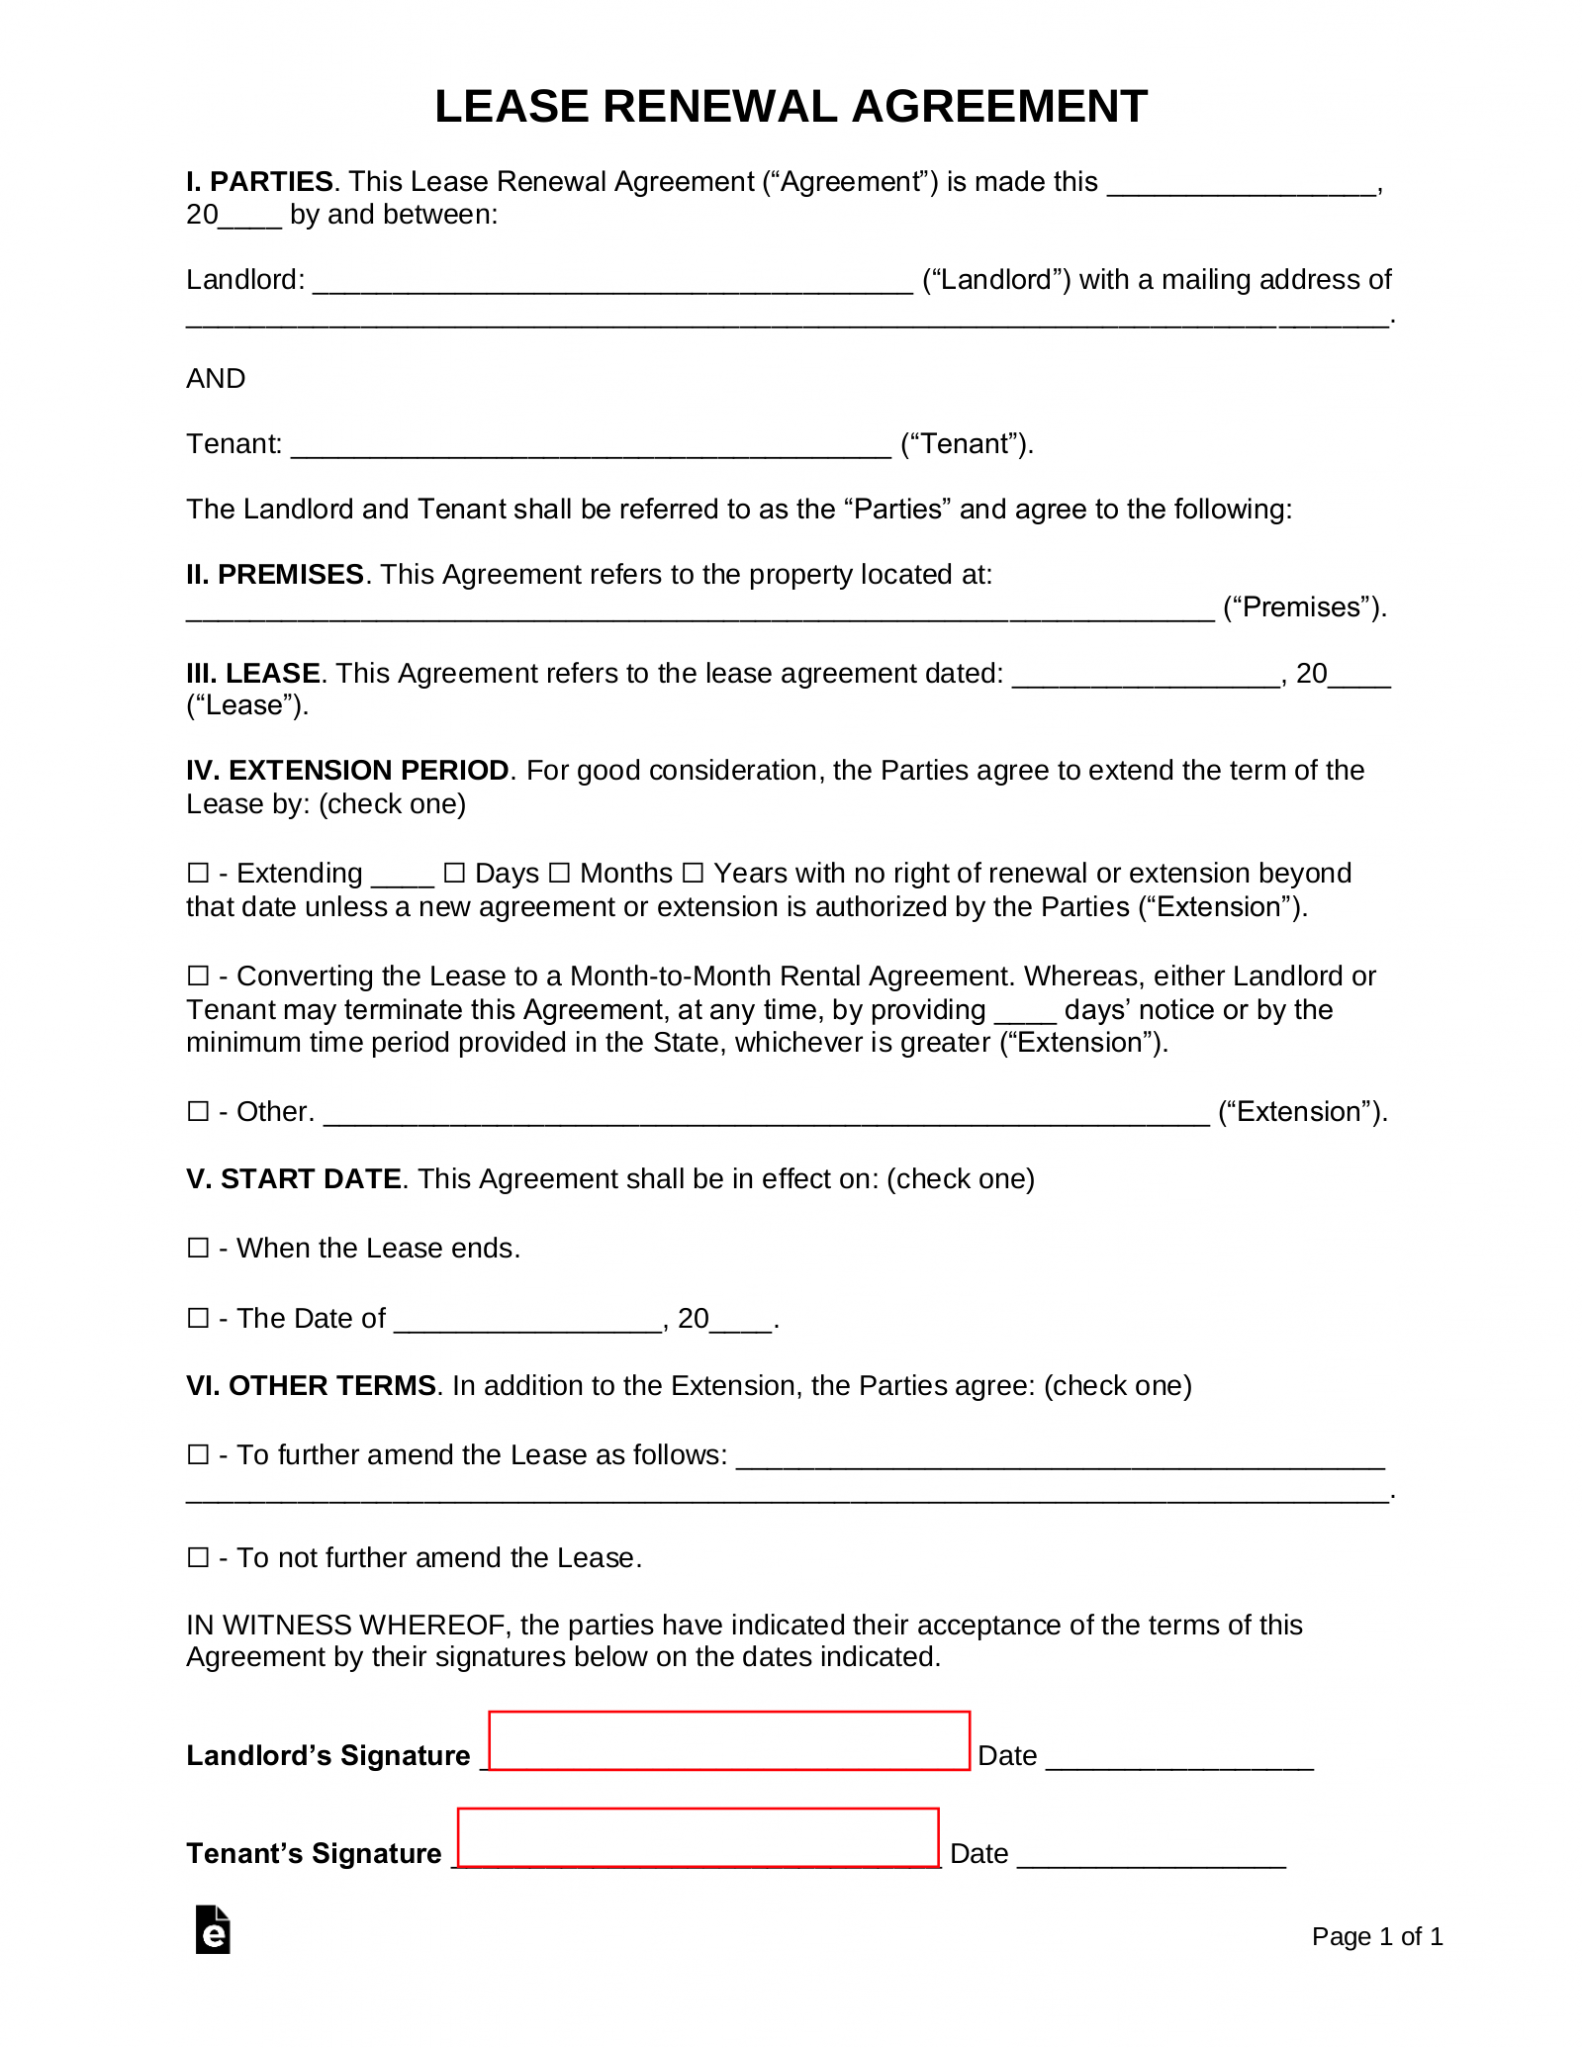 free-lease-renewal-extension-agreement-pdf-word-eforms